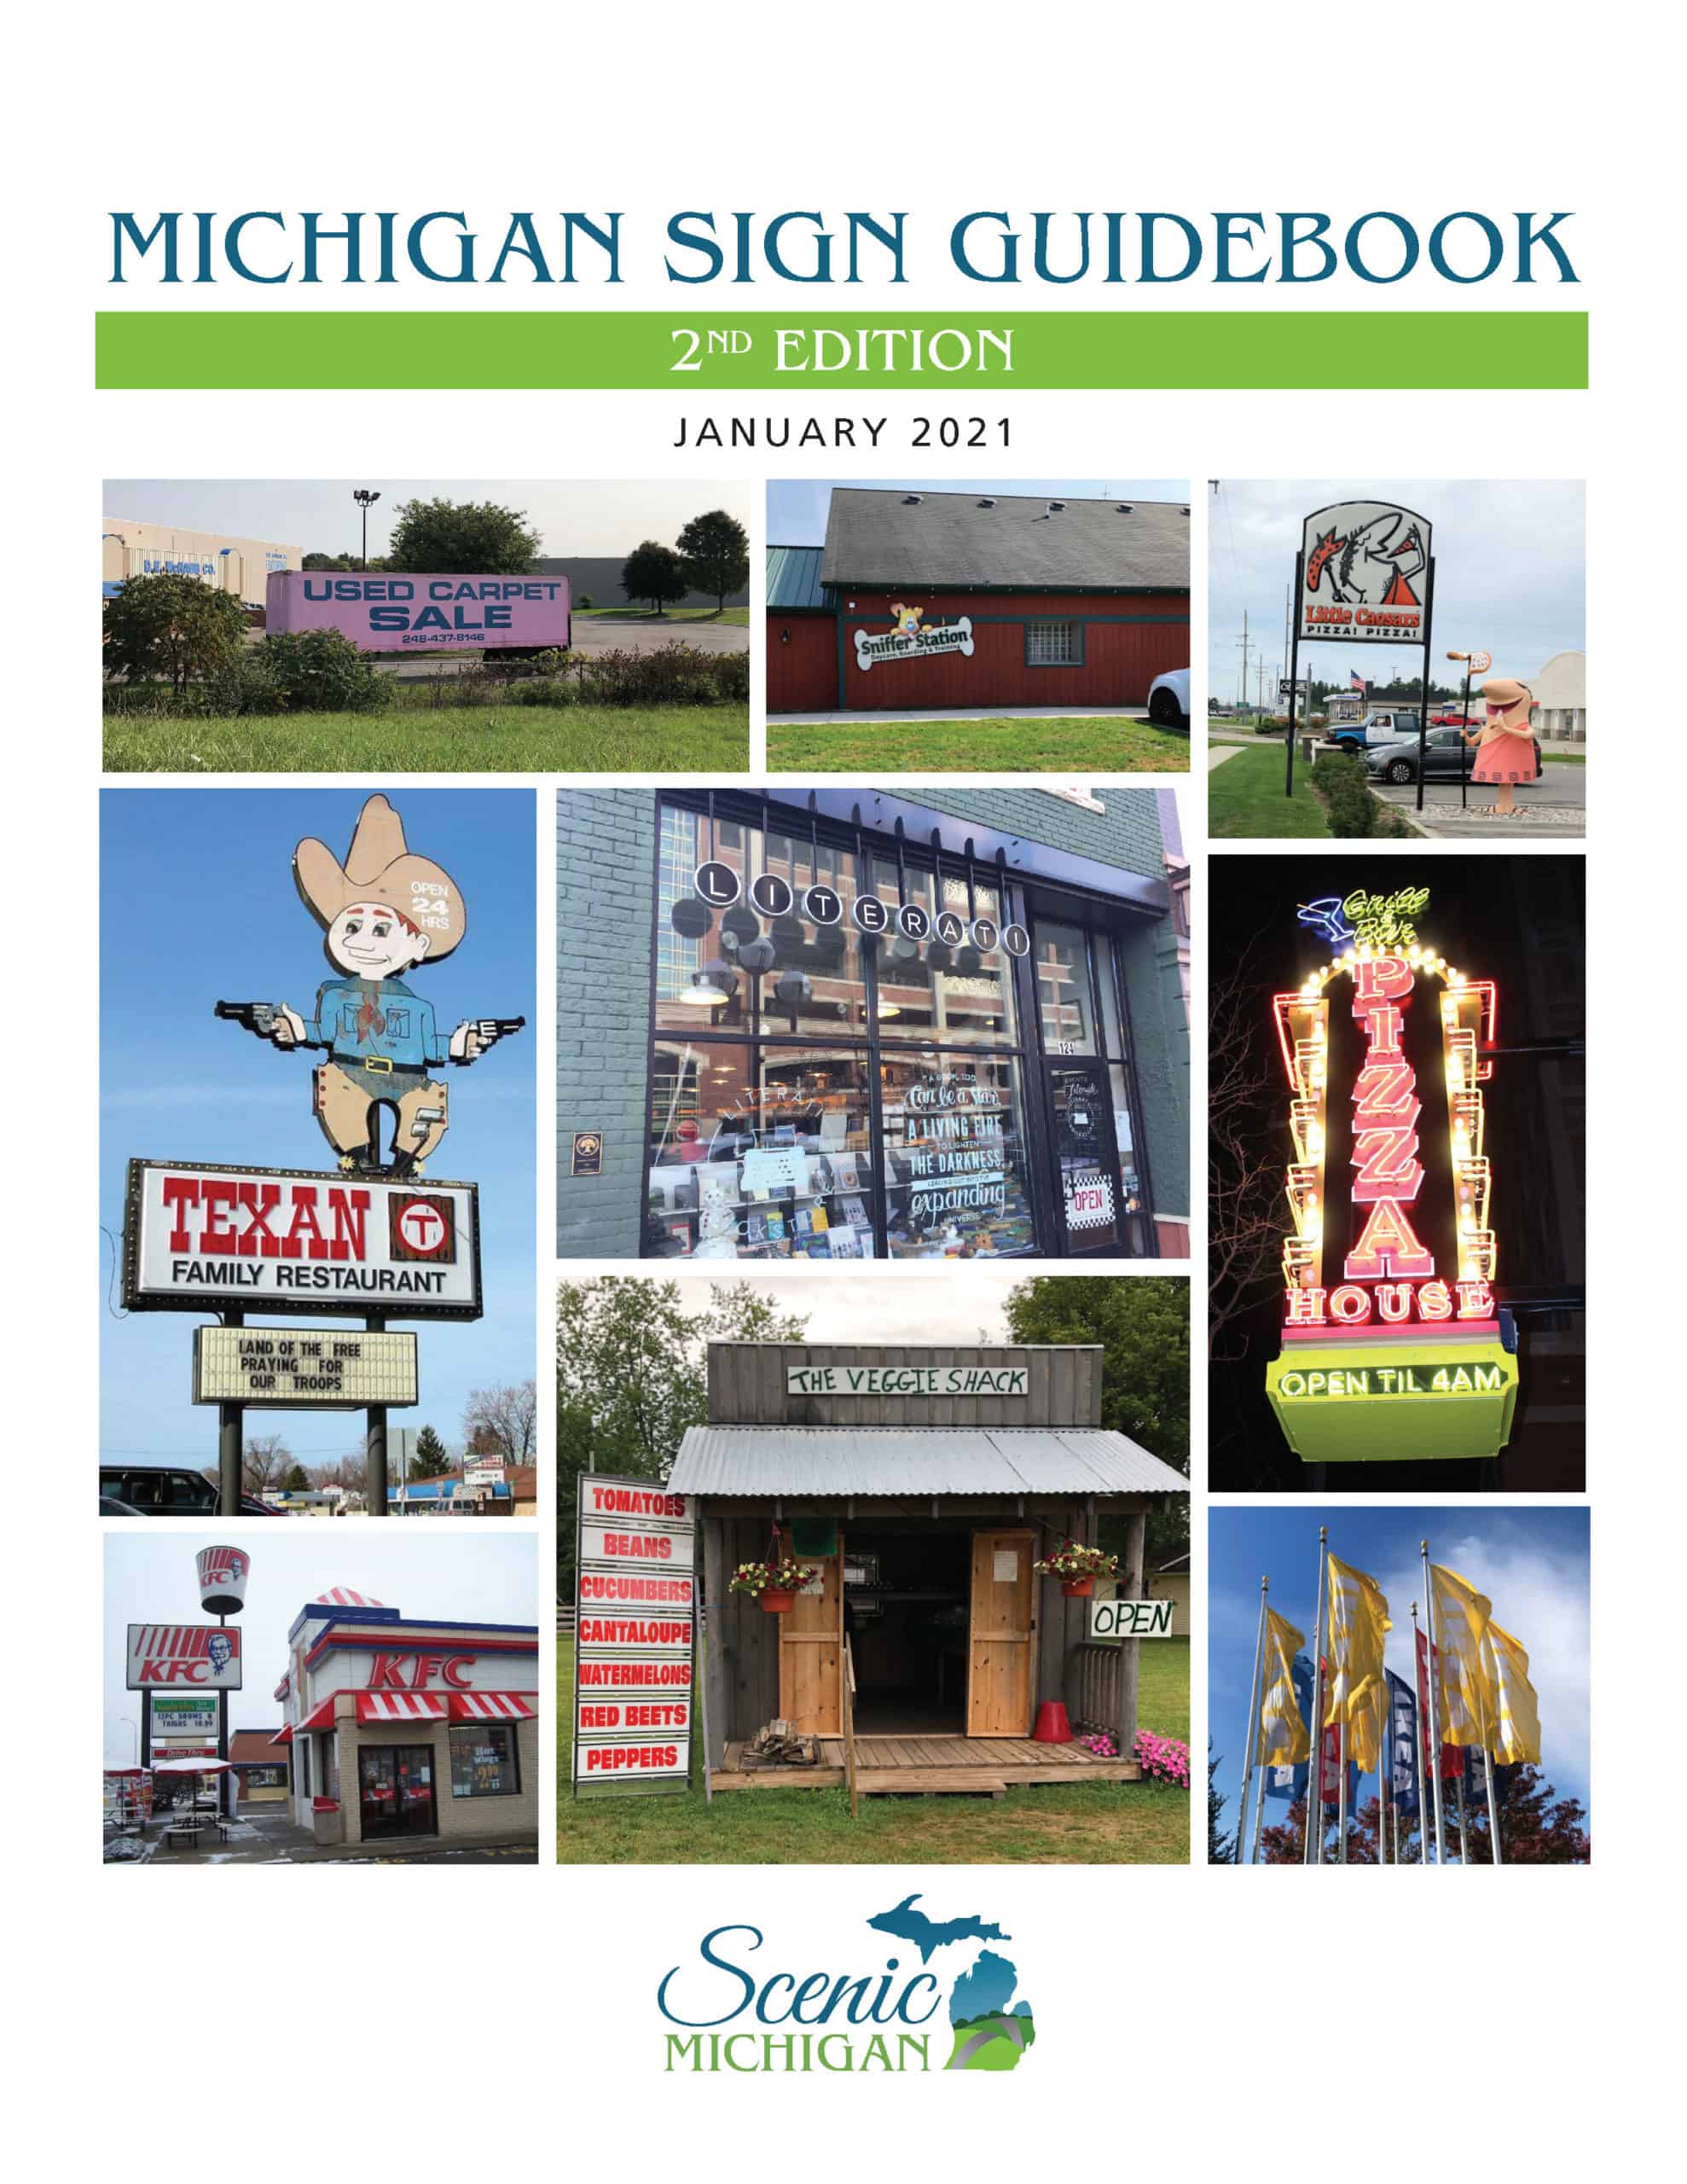 Scenic Michigan Releases 2nd Edition of Michigan Sign Guidebook and Offers May Trainings